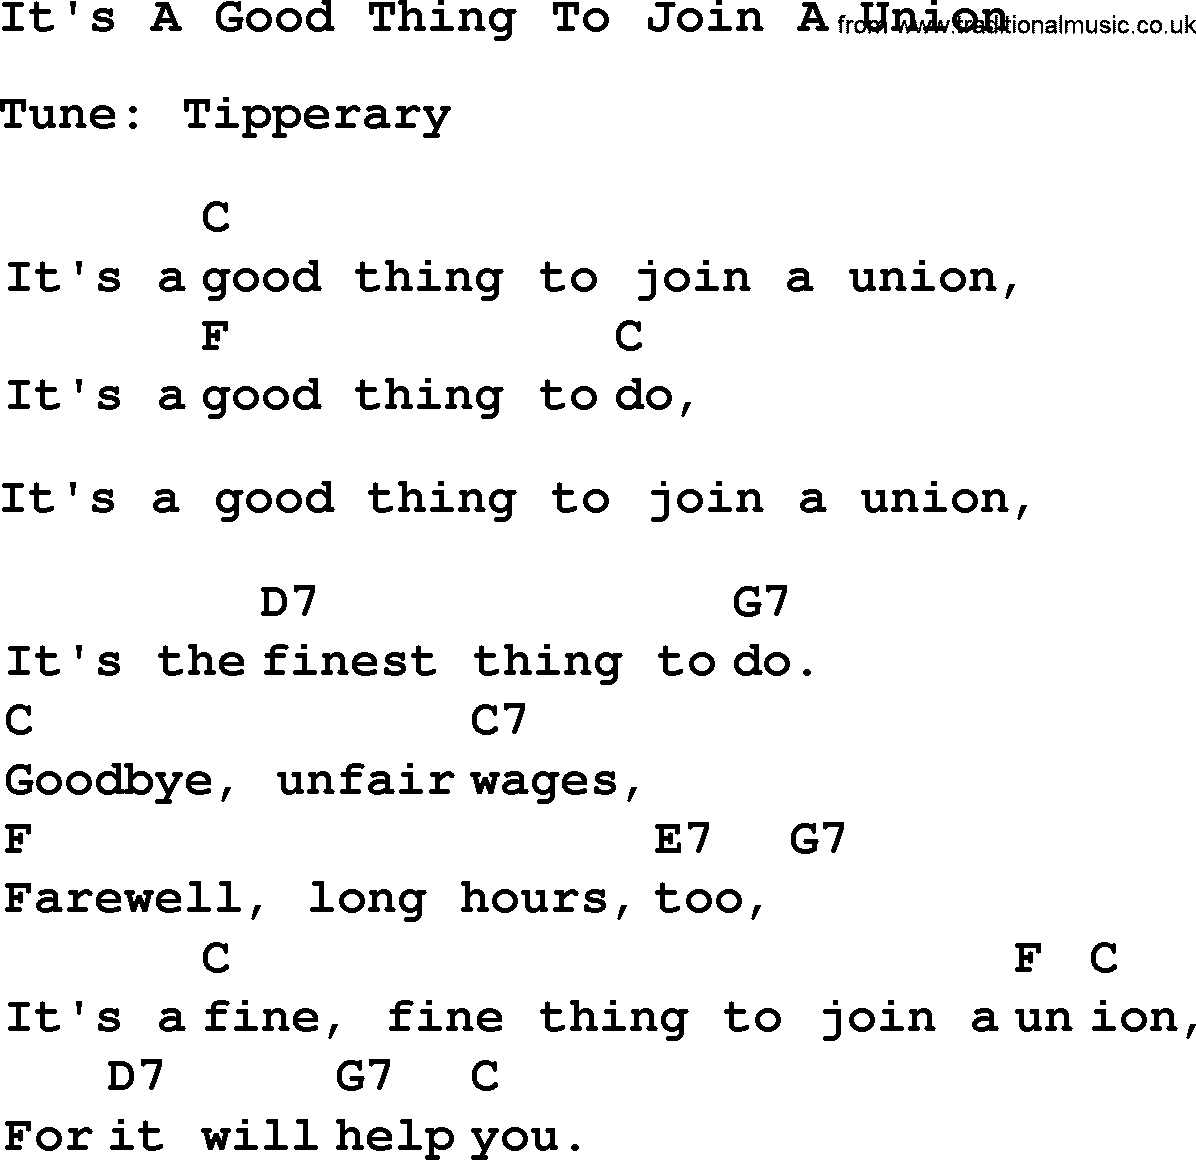 Top 1000 Most Popular Folk and Old-time Songs: Its A Good Thing To Join A Union, lyrics and chords